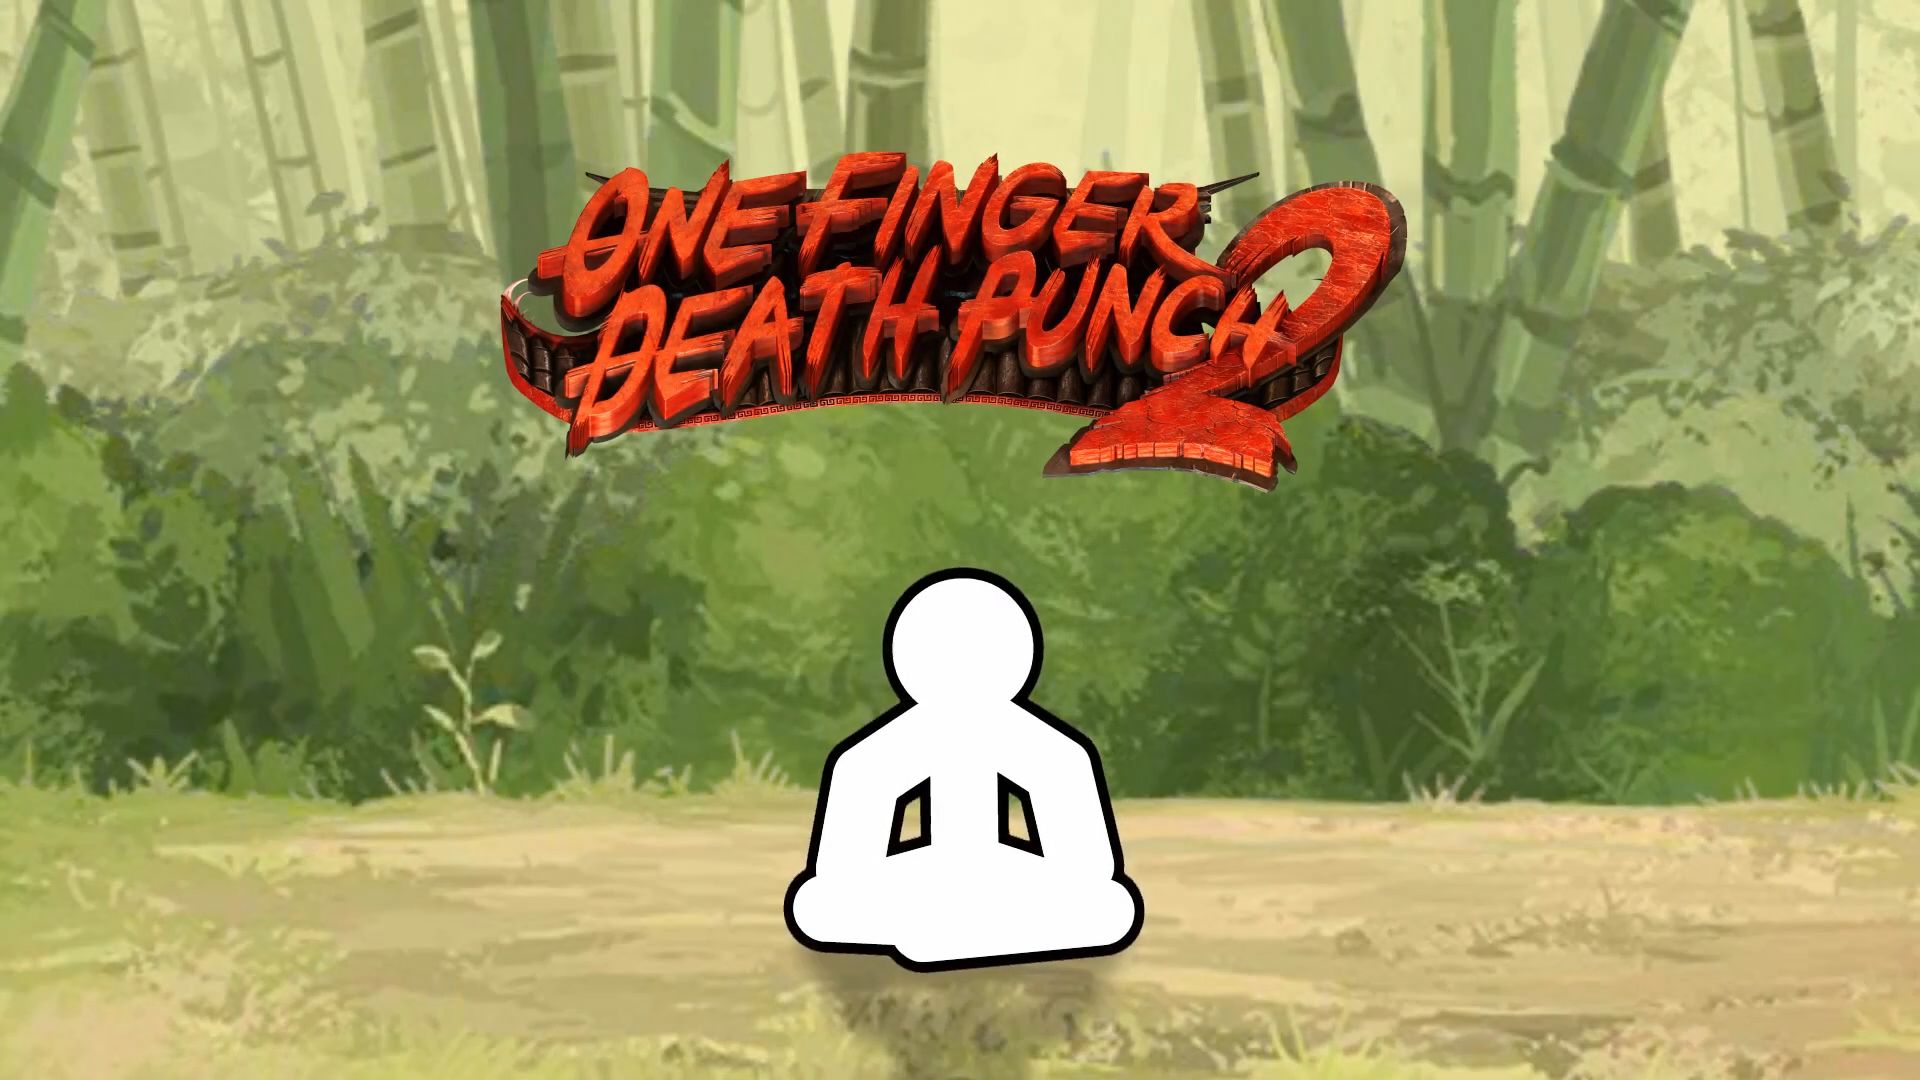 Baixar One Finger Death Punch 2 para Android grátis.